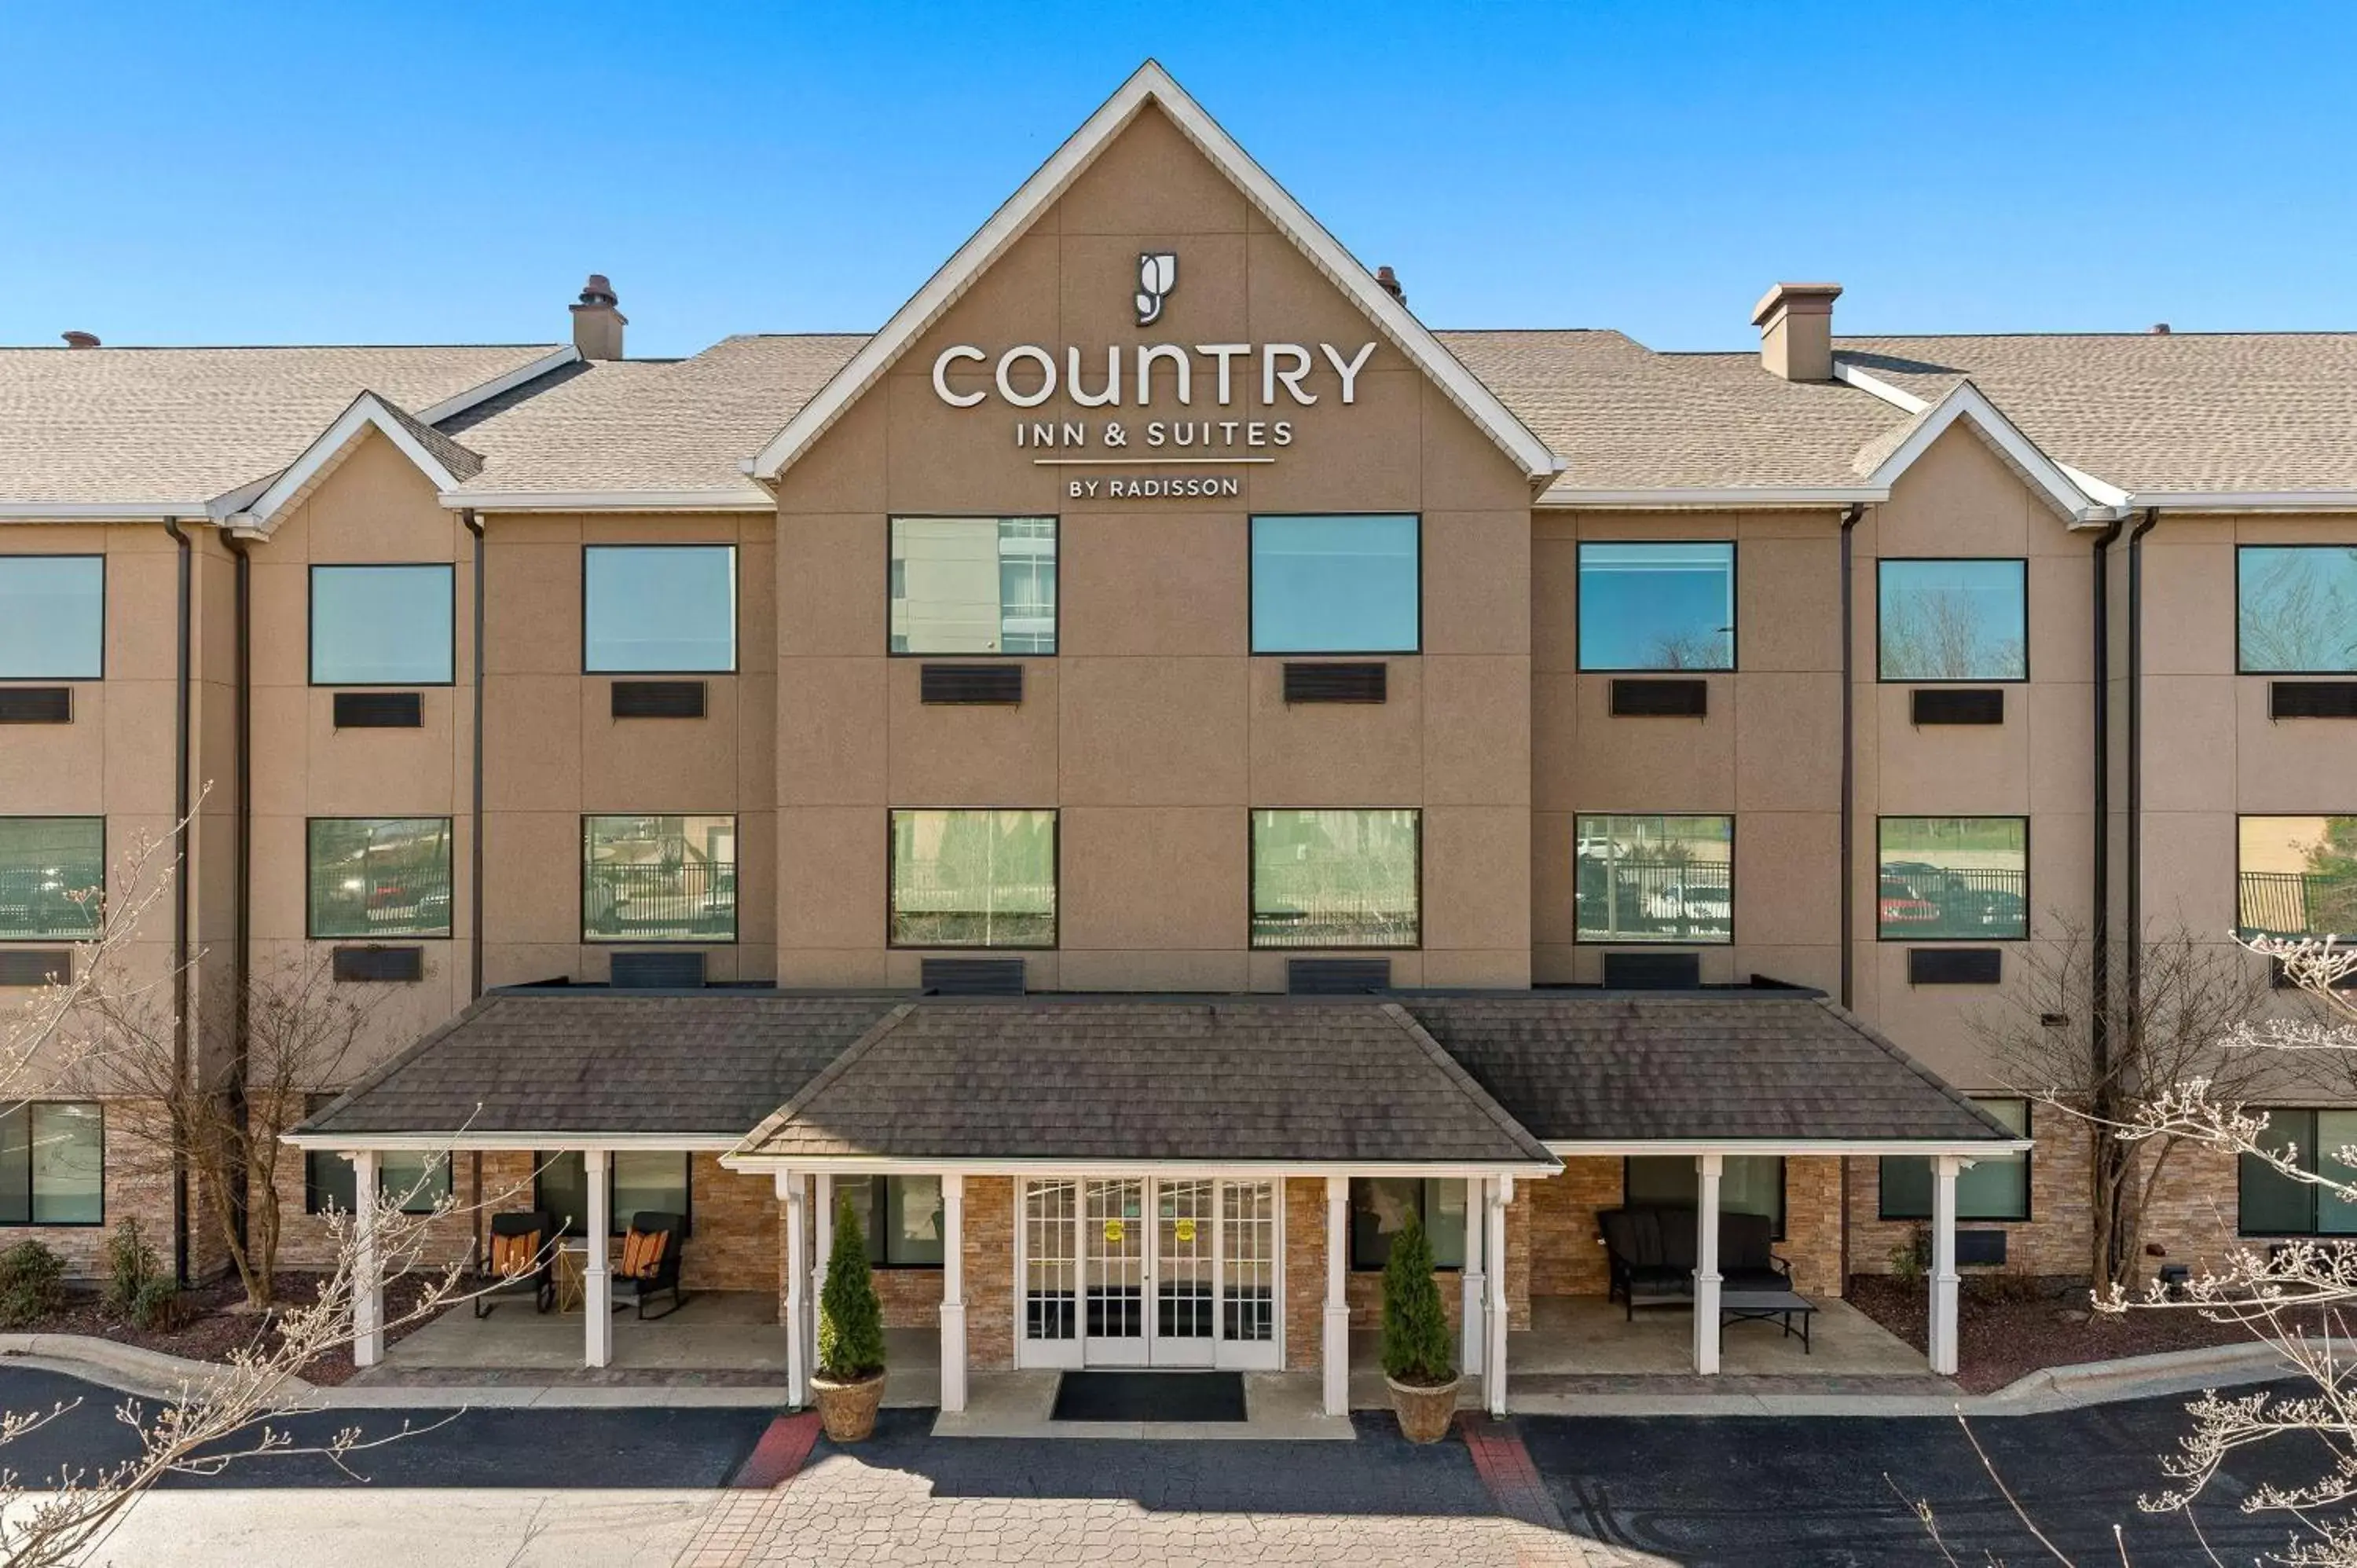 Property Building in Country Inn & Suites by Radisson, Asheville at Asheville Outlet Mall, NC